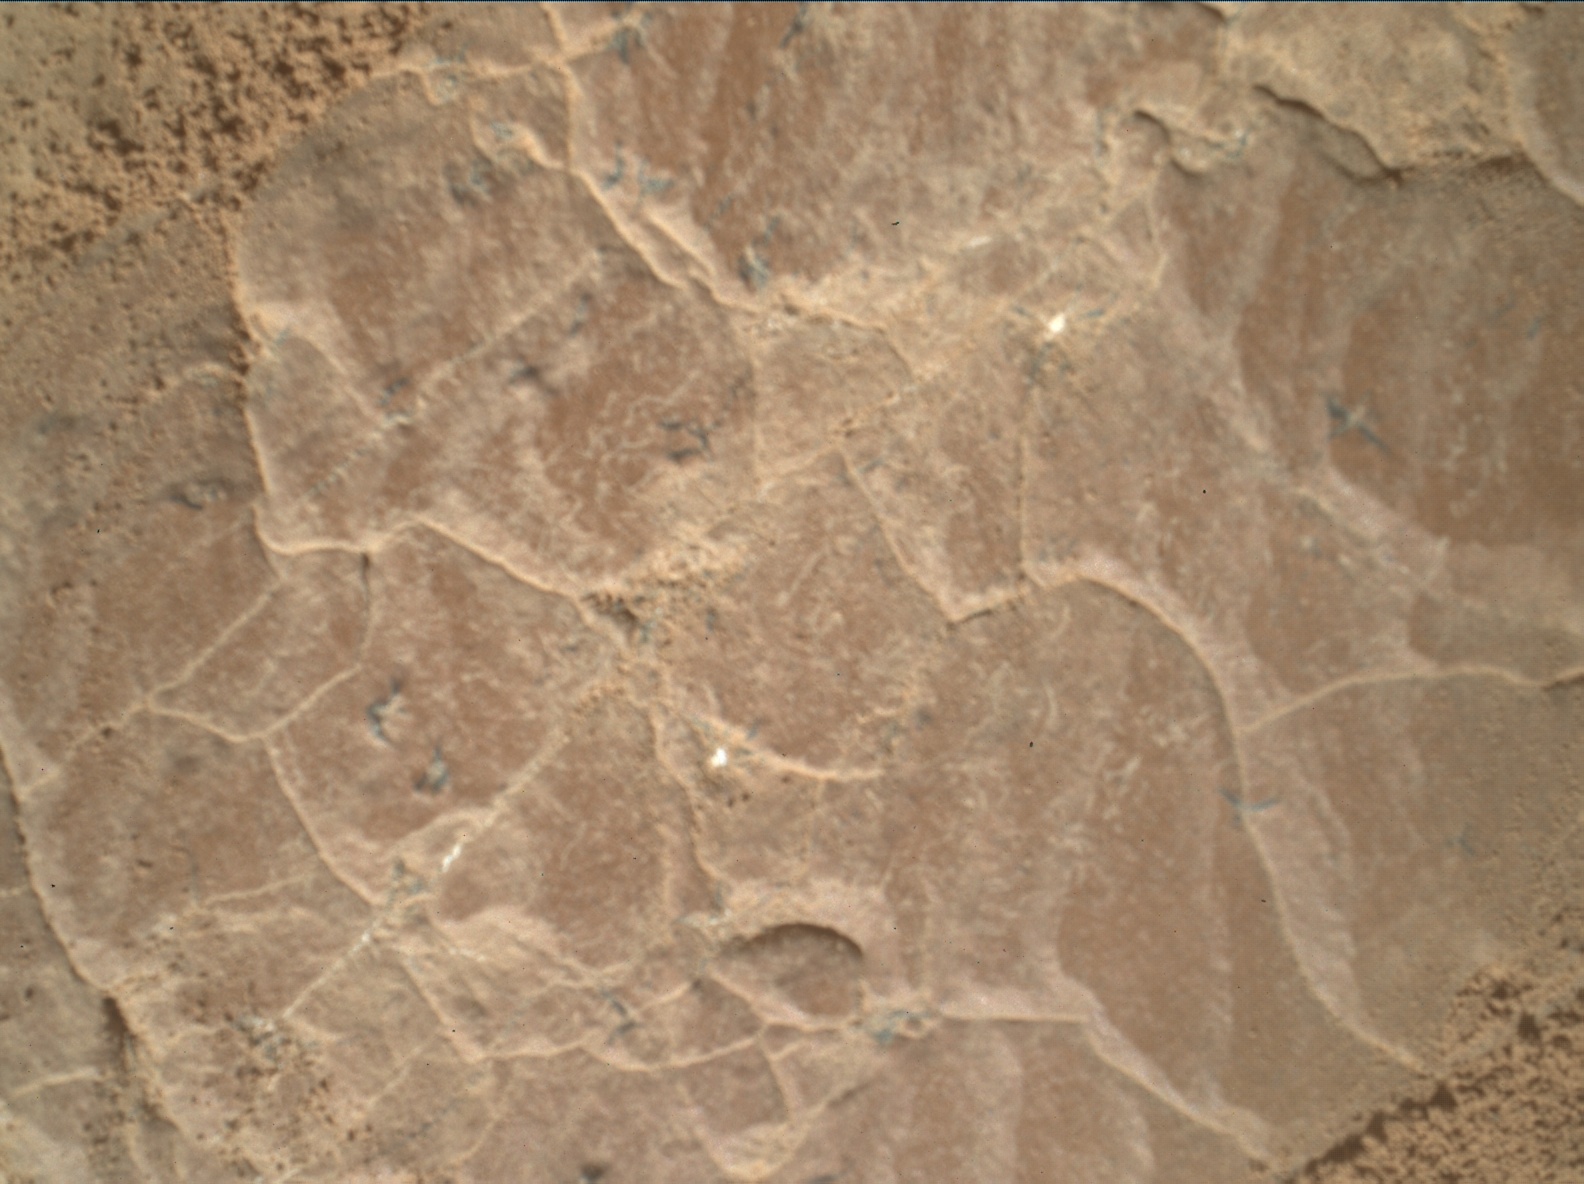 Nasa's Mars rover Curiosity acquired this image using its Mars Hand Lens Imager (MAHLI) on Sol 2597